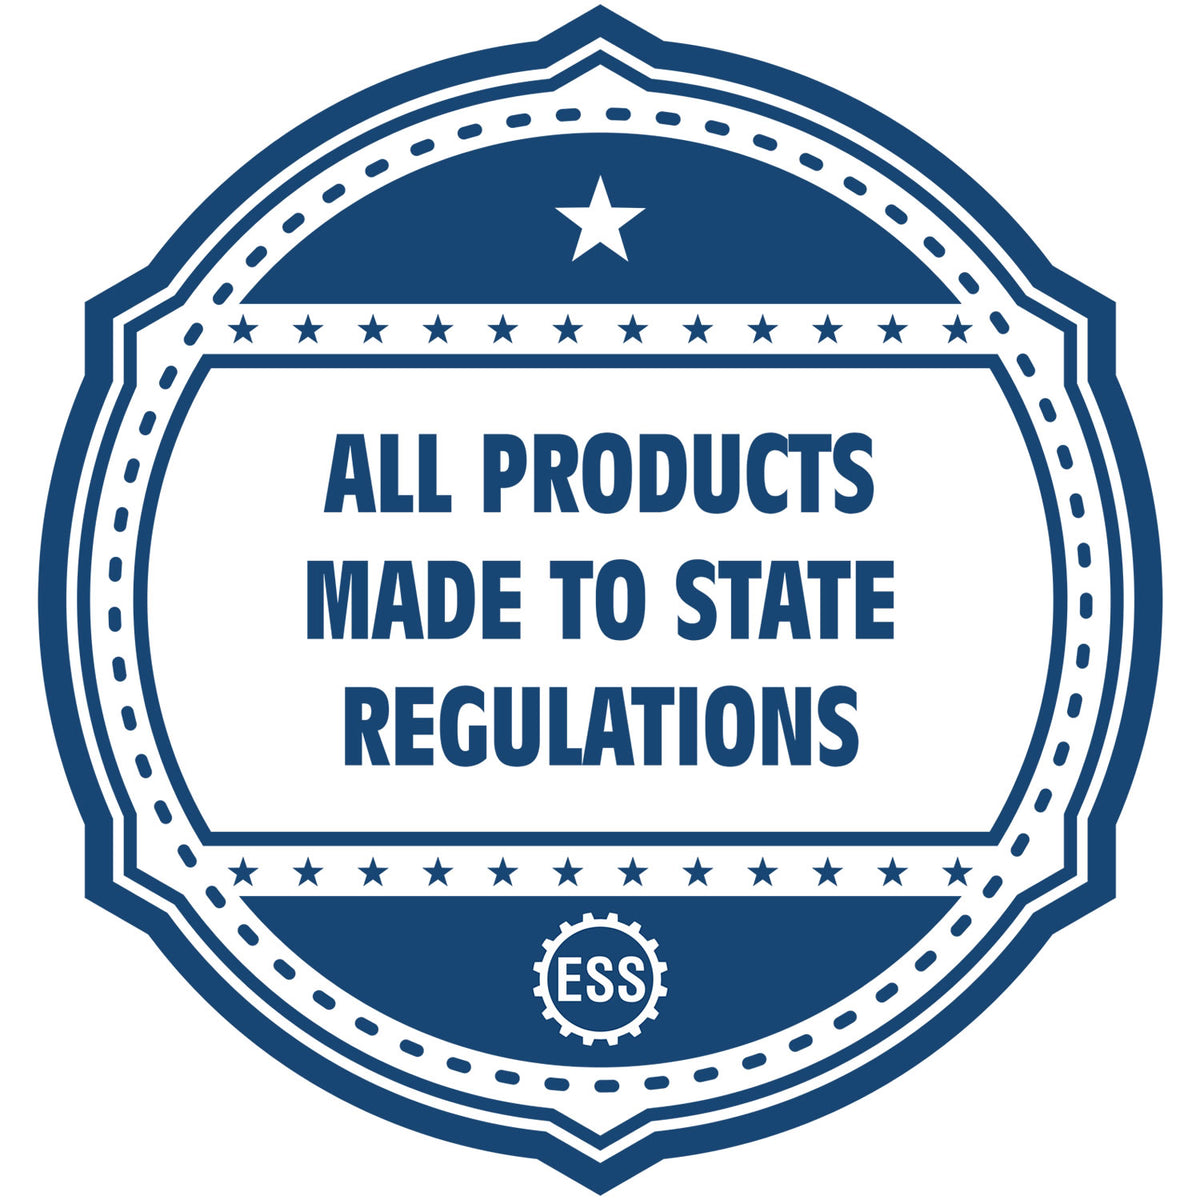 An icon or badge element for the Super Slim Montana Notary Public Stamp showing that this product is made in compliance with state regulations.